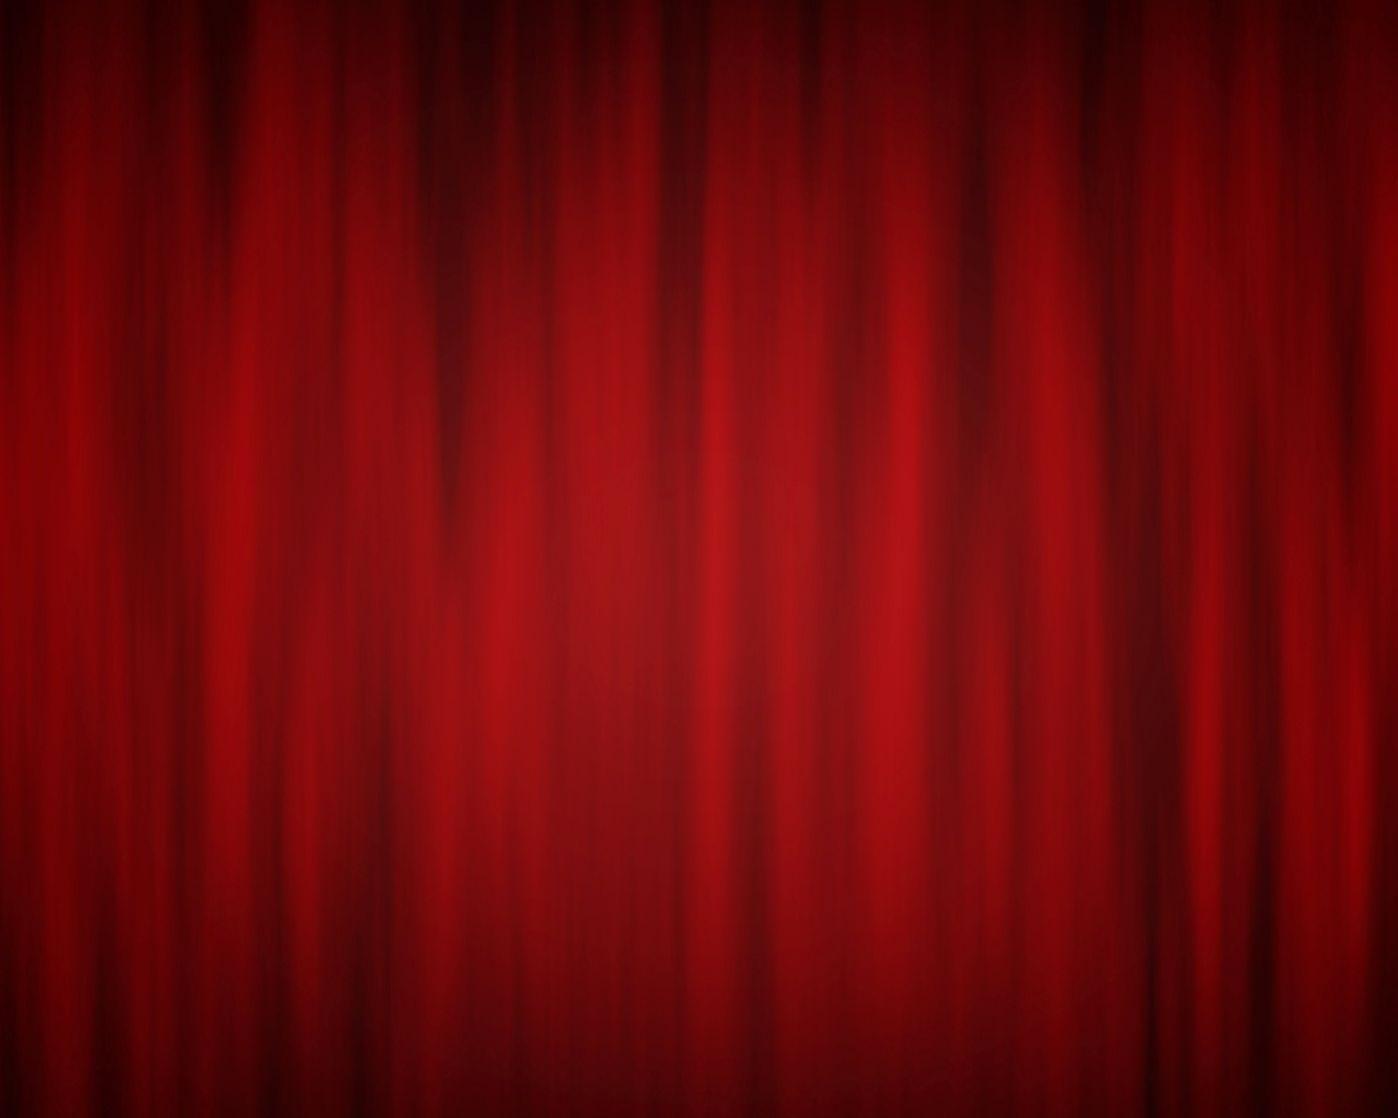 Wallpapers For > Red And Black Backgrounds Image